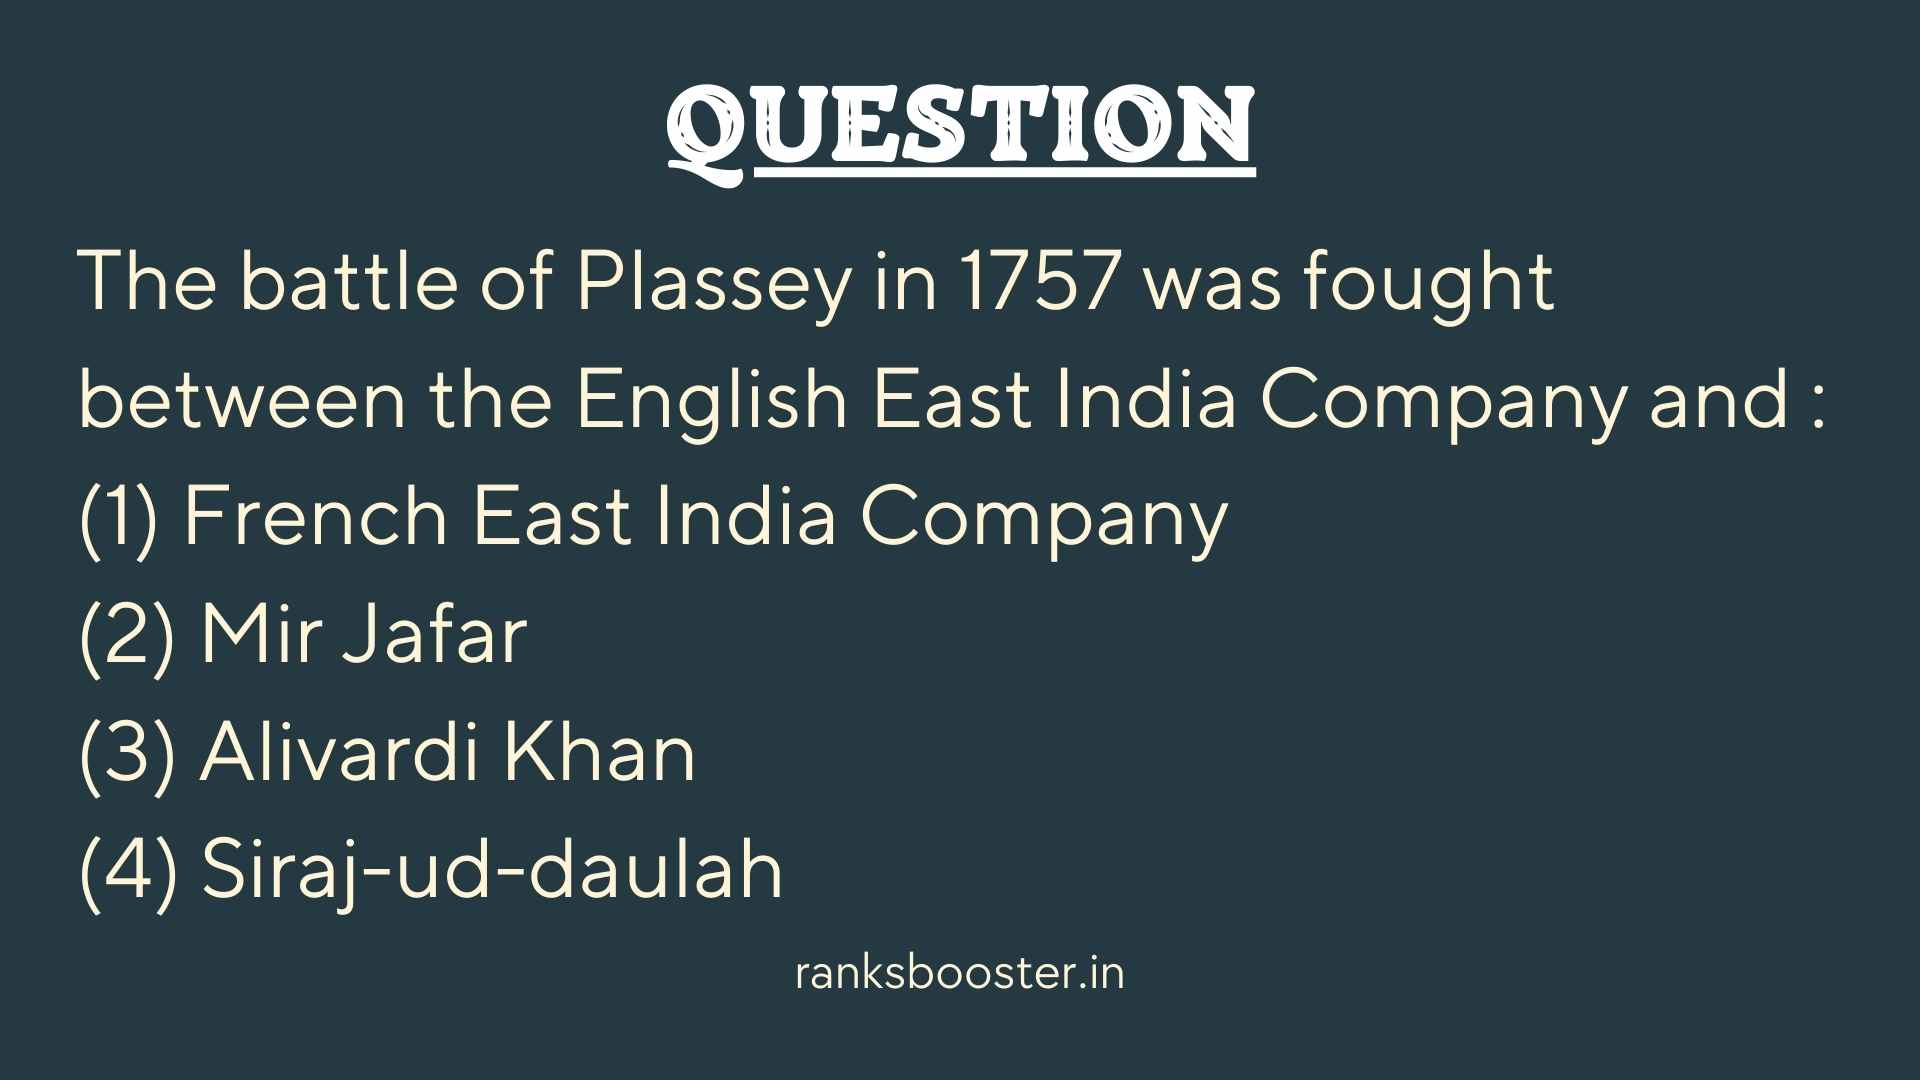 The battle of Plassey in 1757 was fought between the English East India Company and